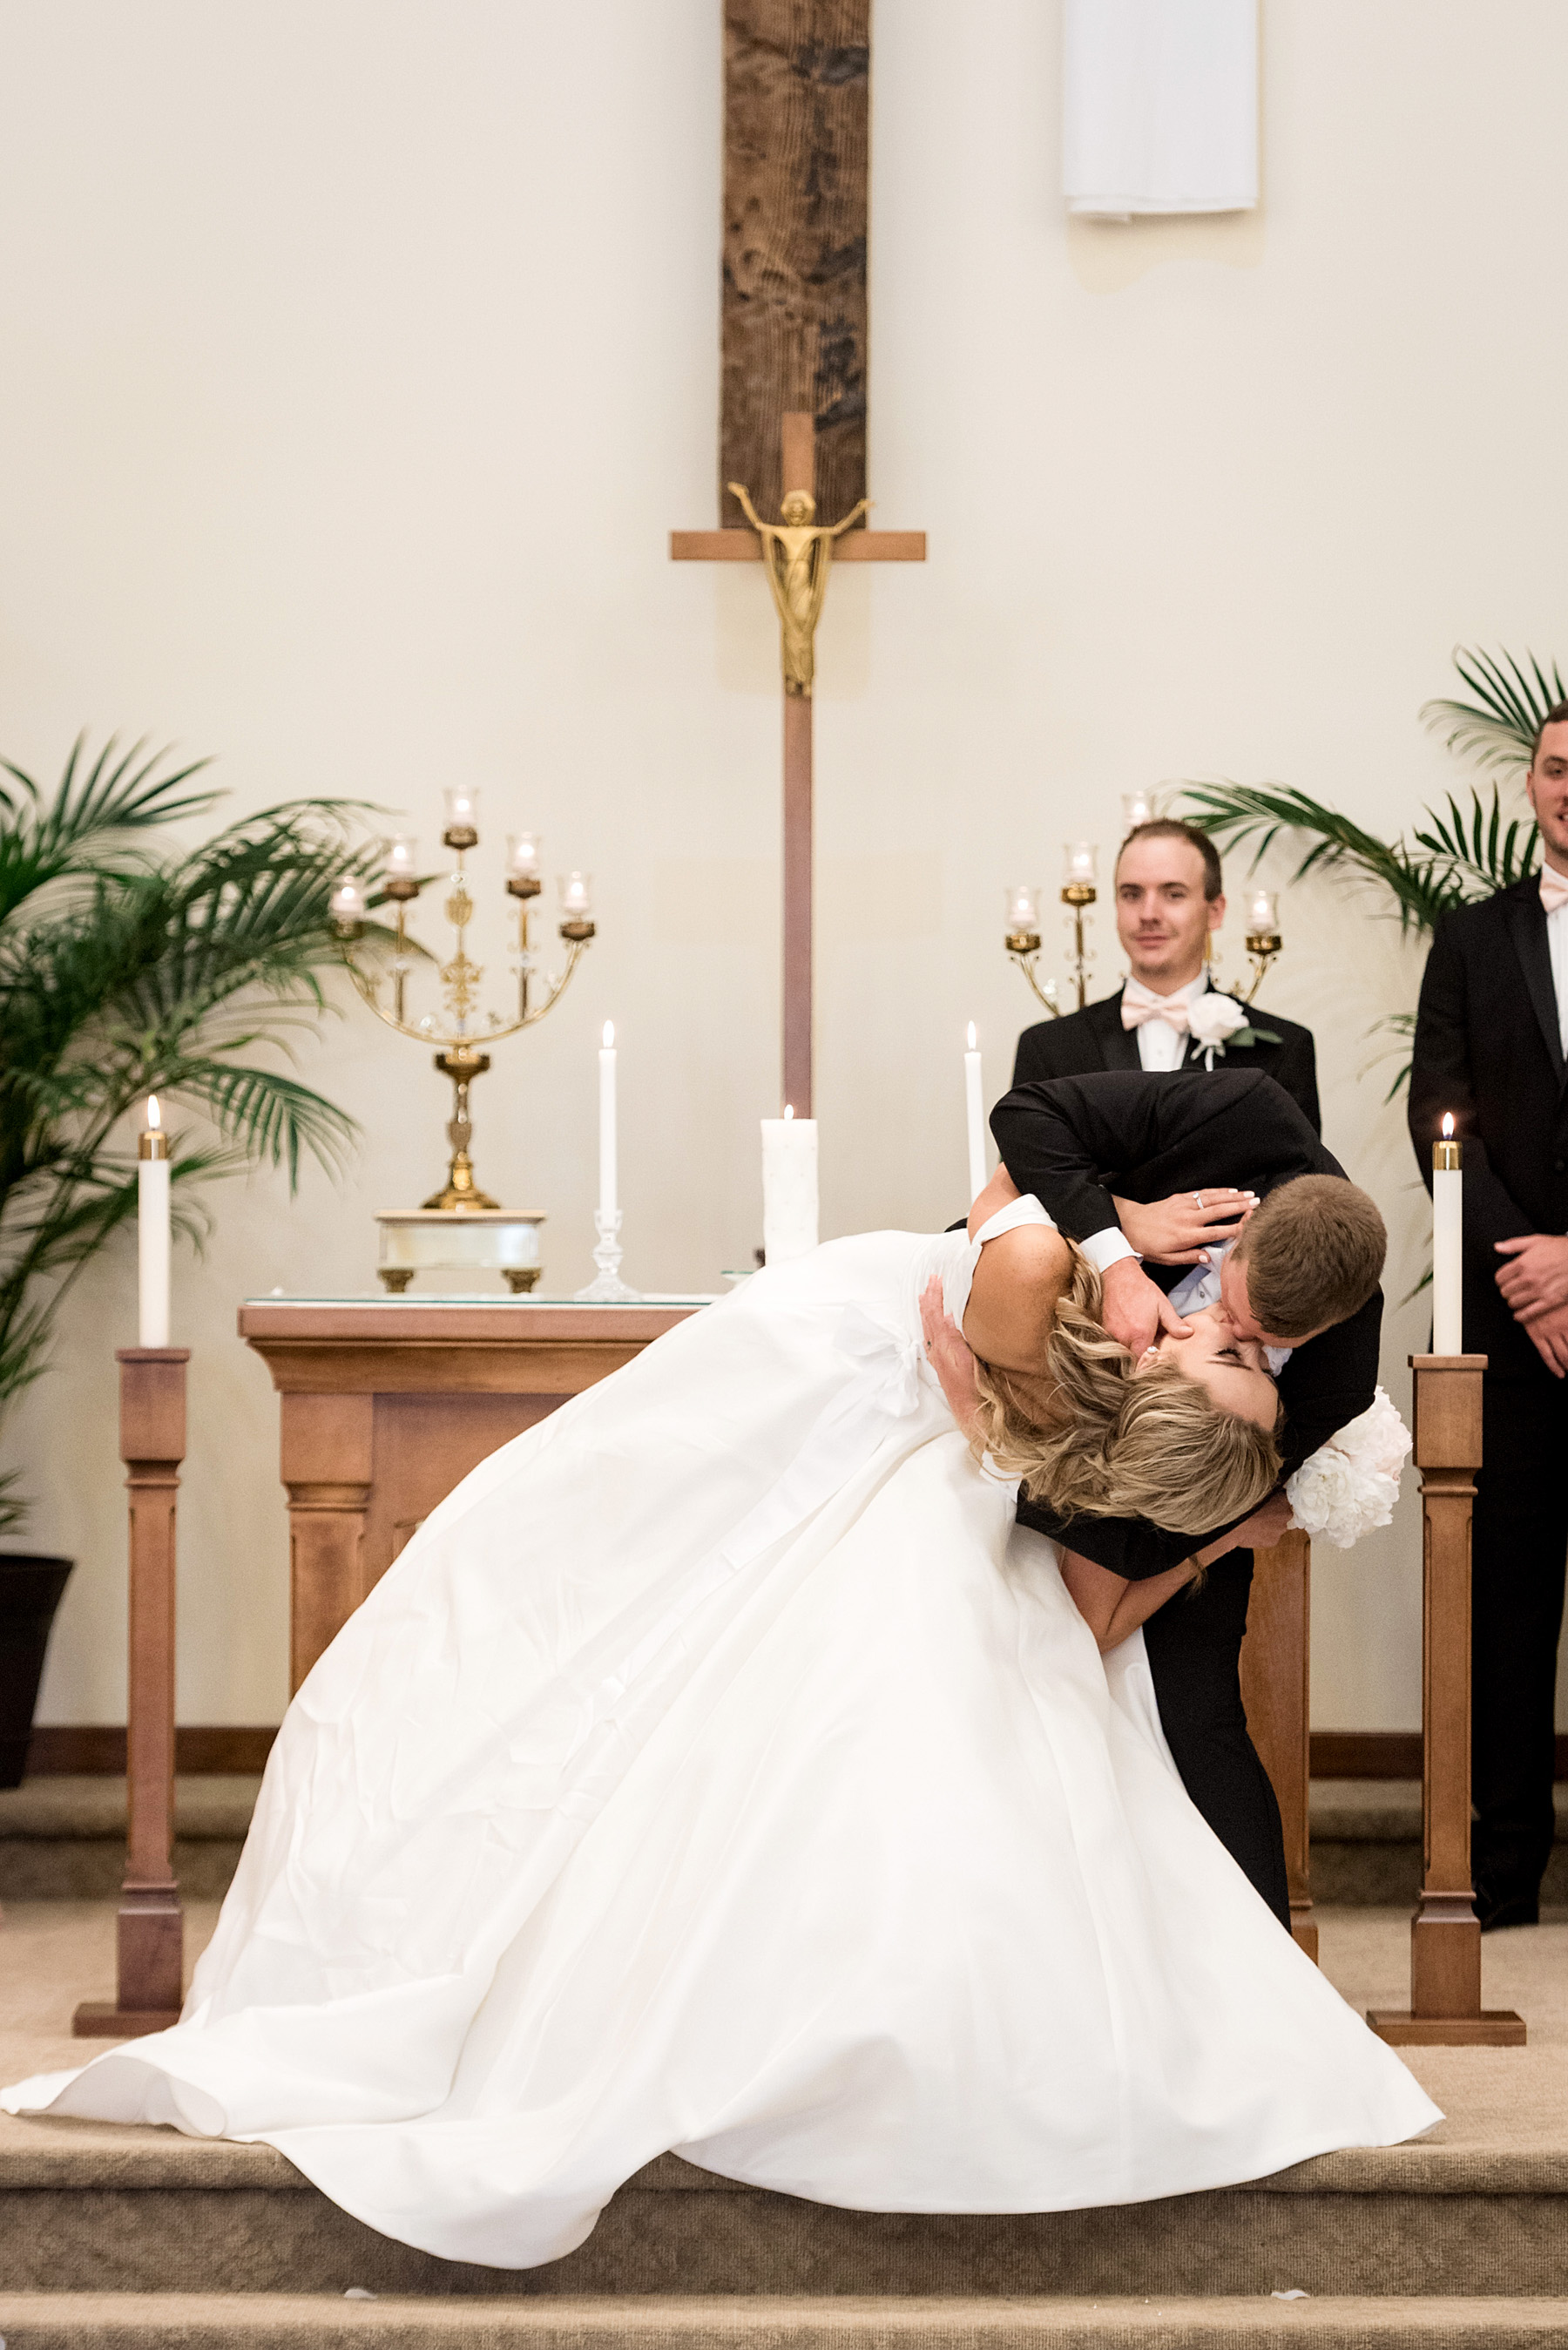 ceremony at resurrection catholic church in evansville indiana by ashley fisher photography